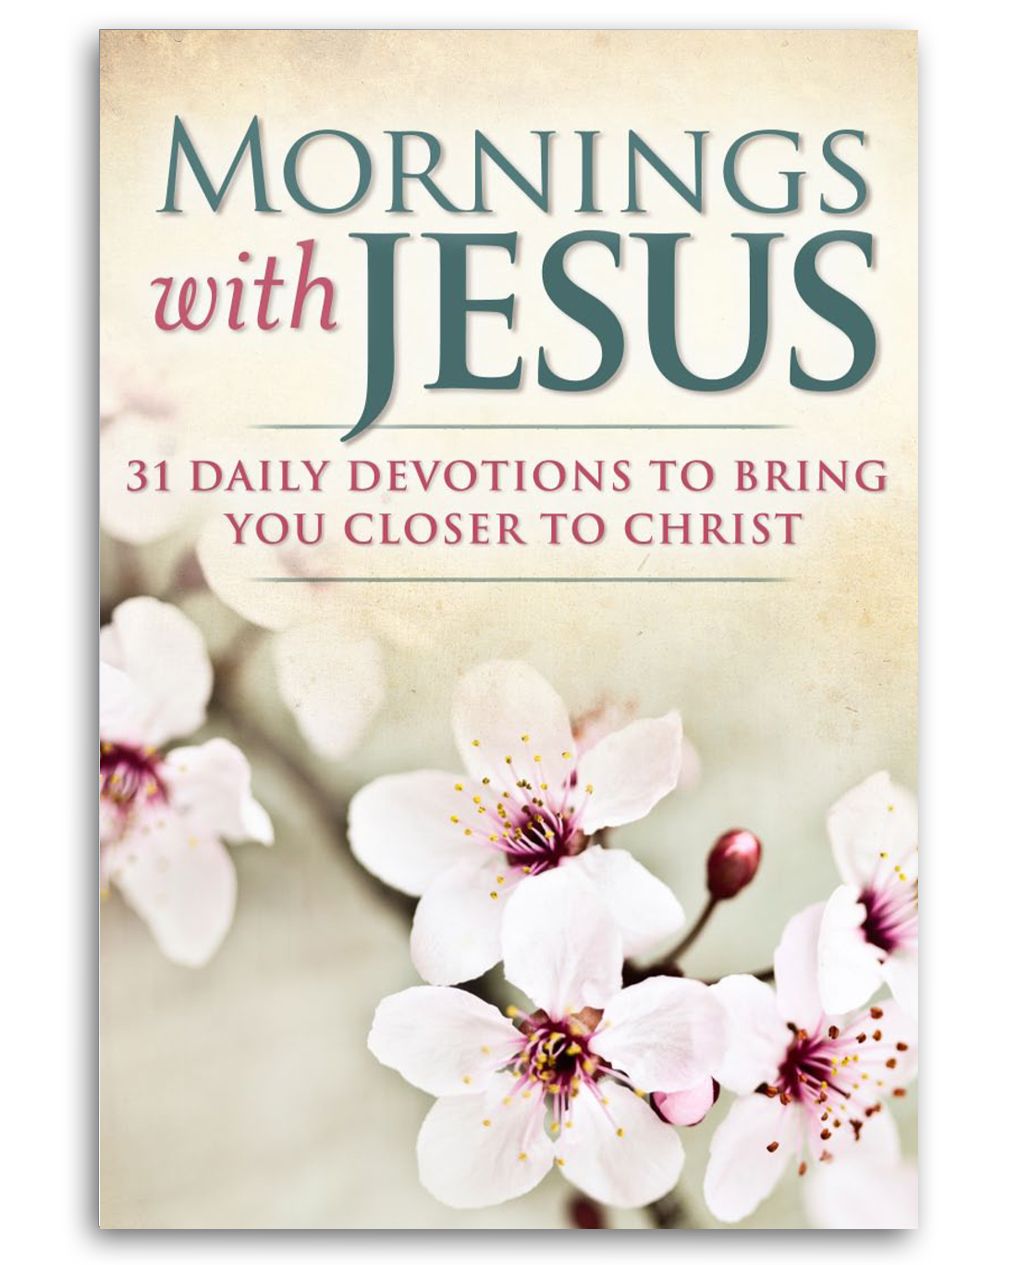 Mornings with Jesus 31 Daily Devotions to Bring You Closer to Christ